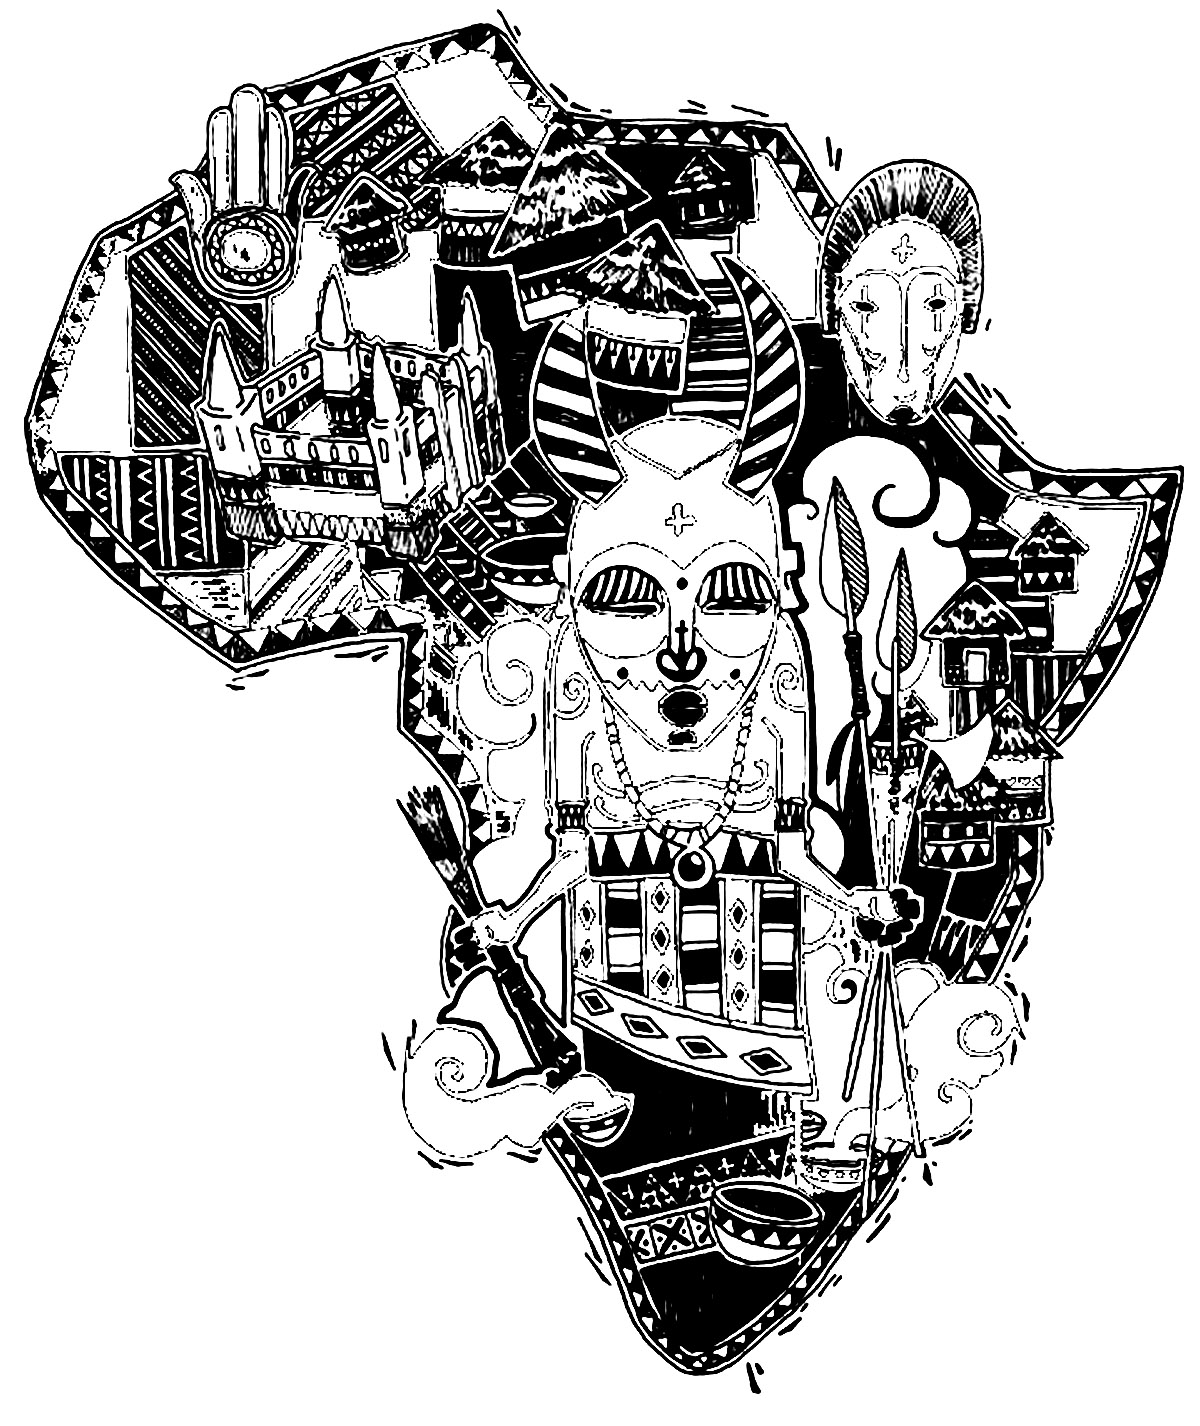 The African continent map, and its symbols